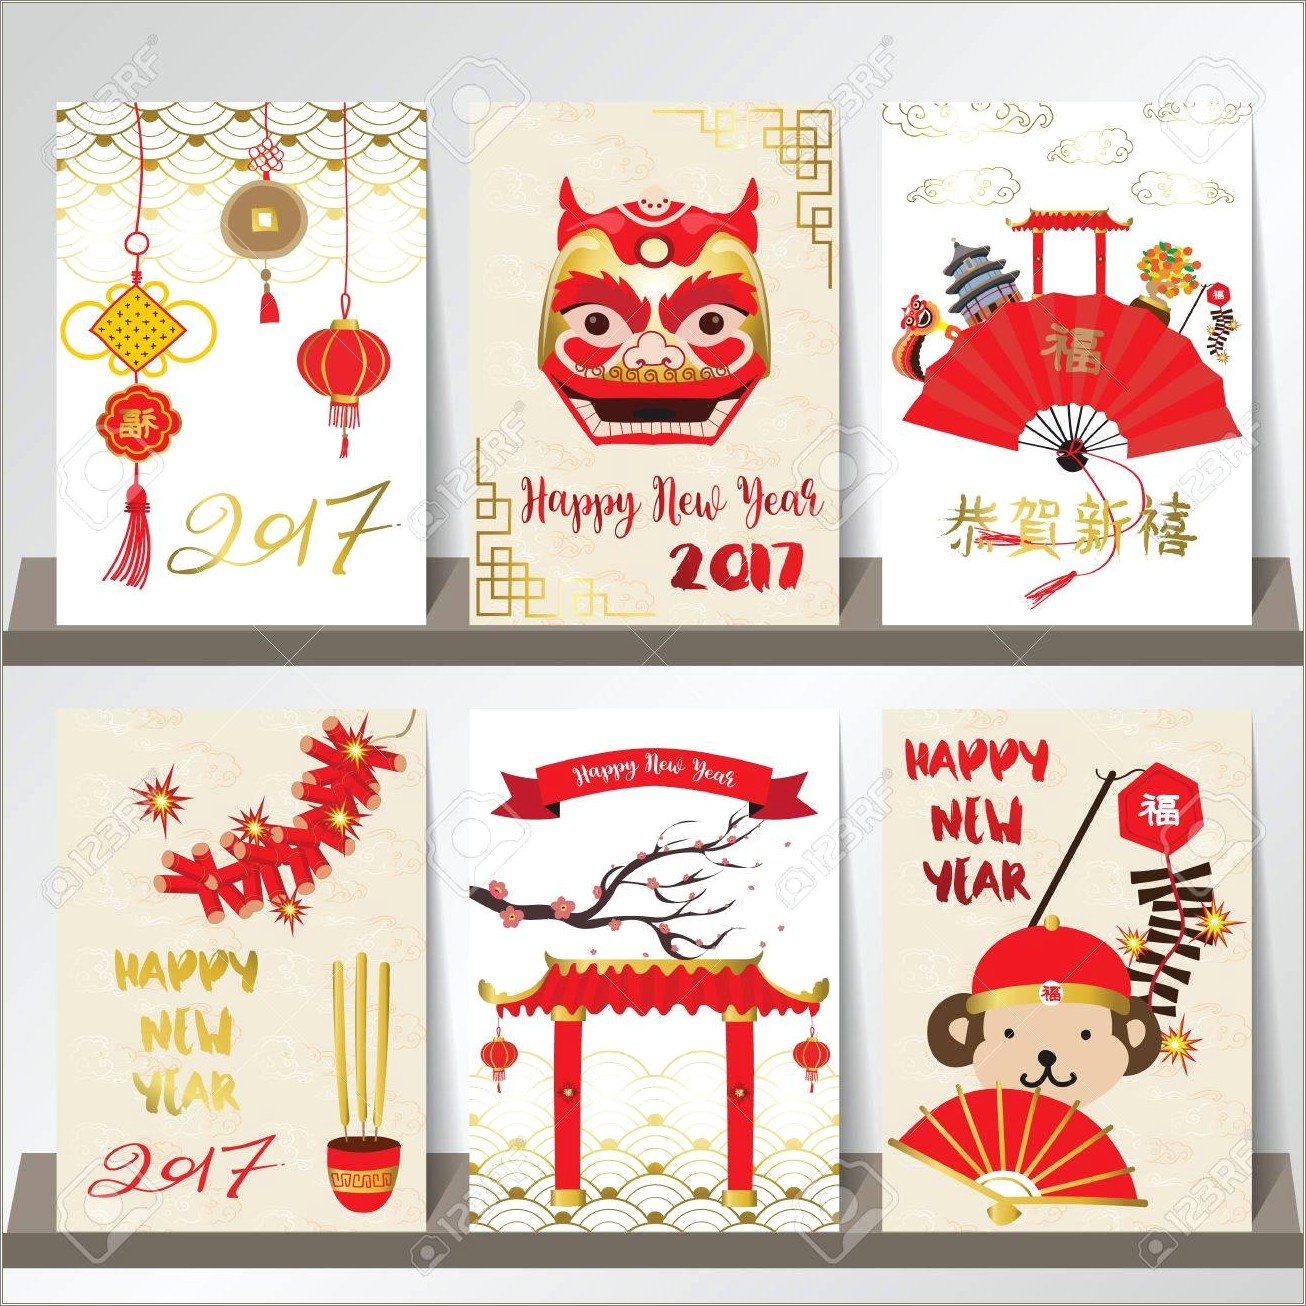 Free Chineese Temple Images Templates For Cards